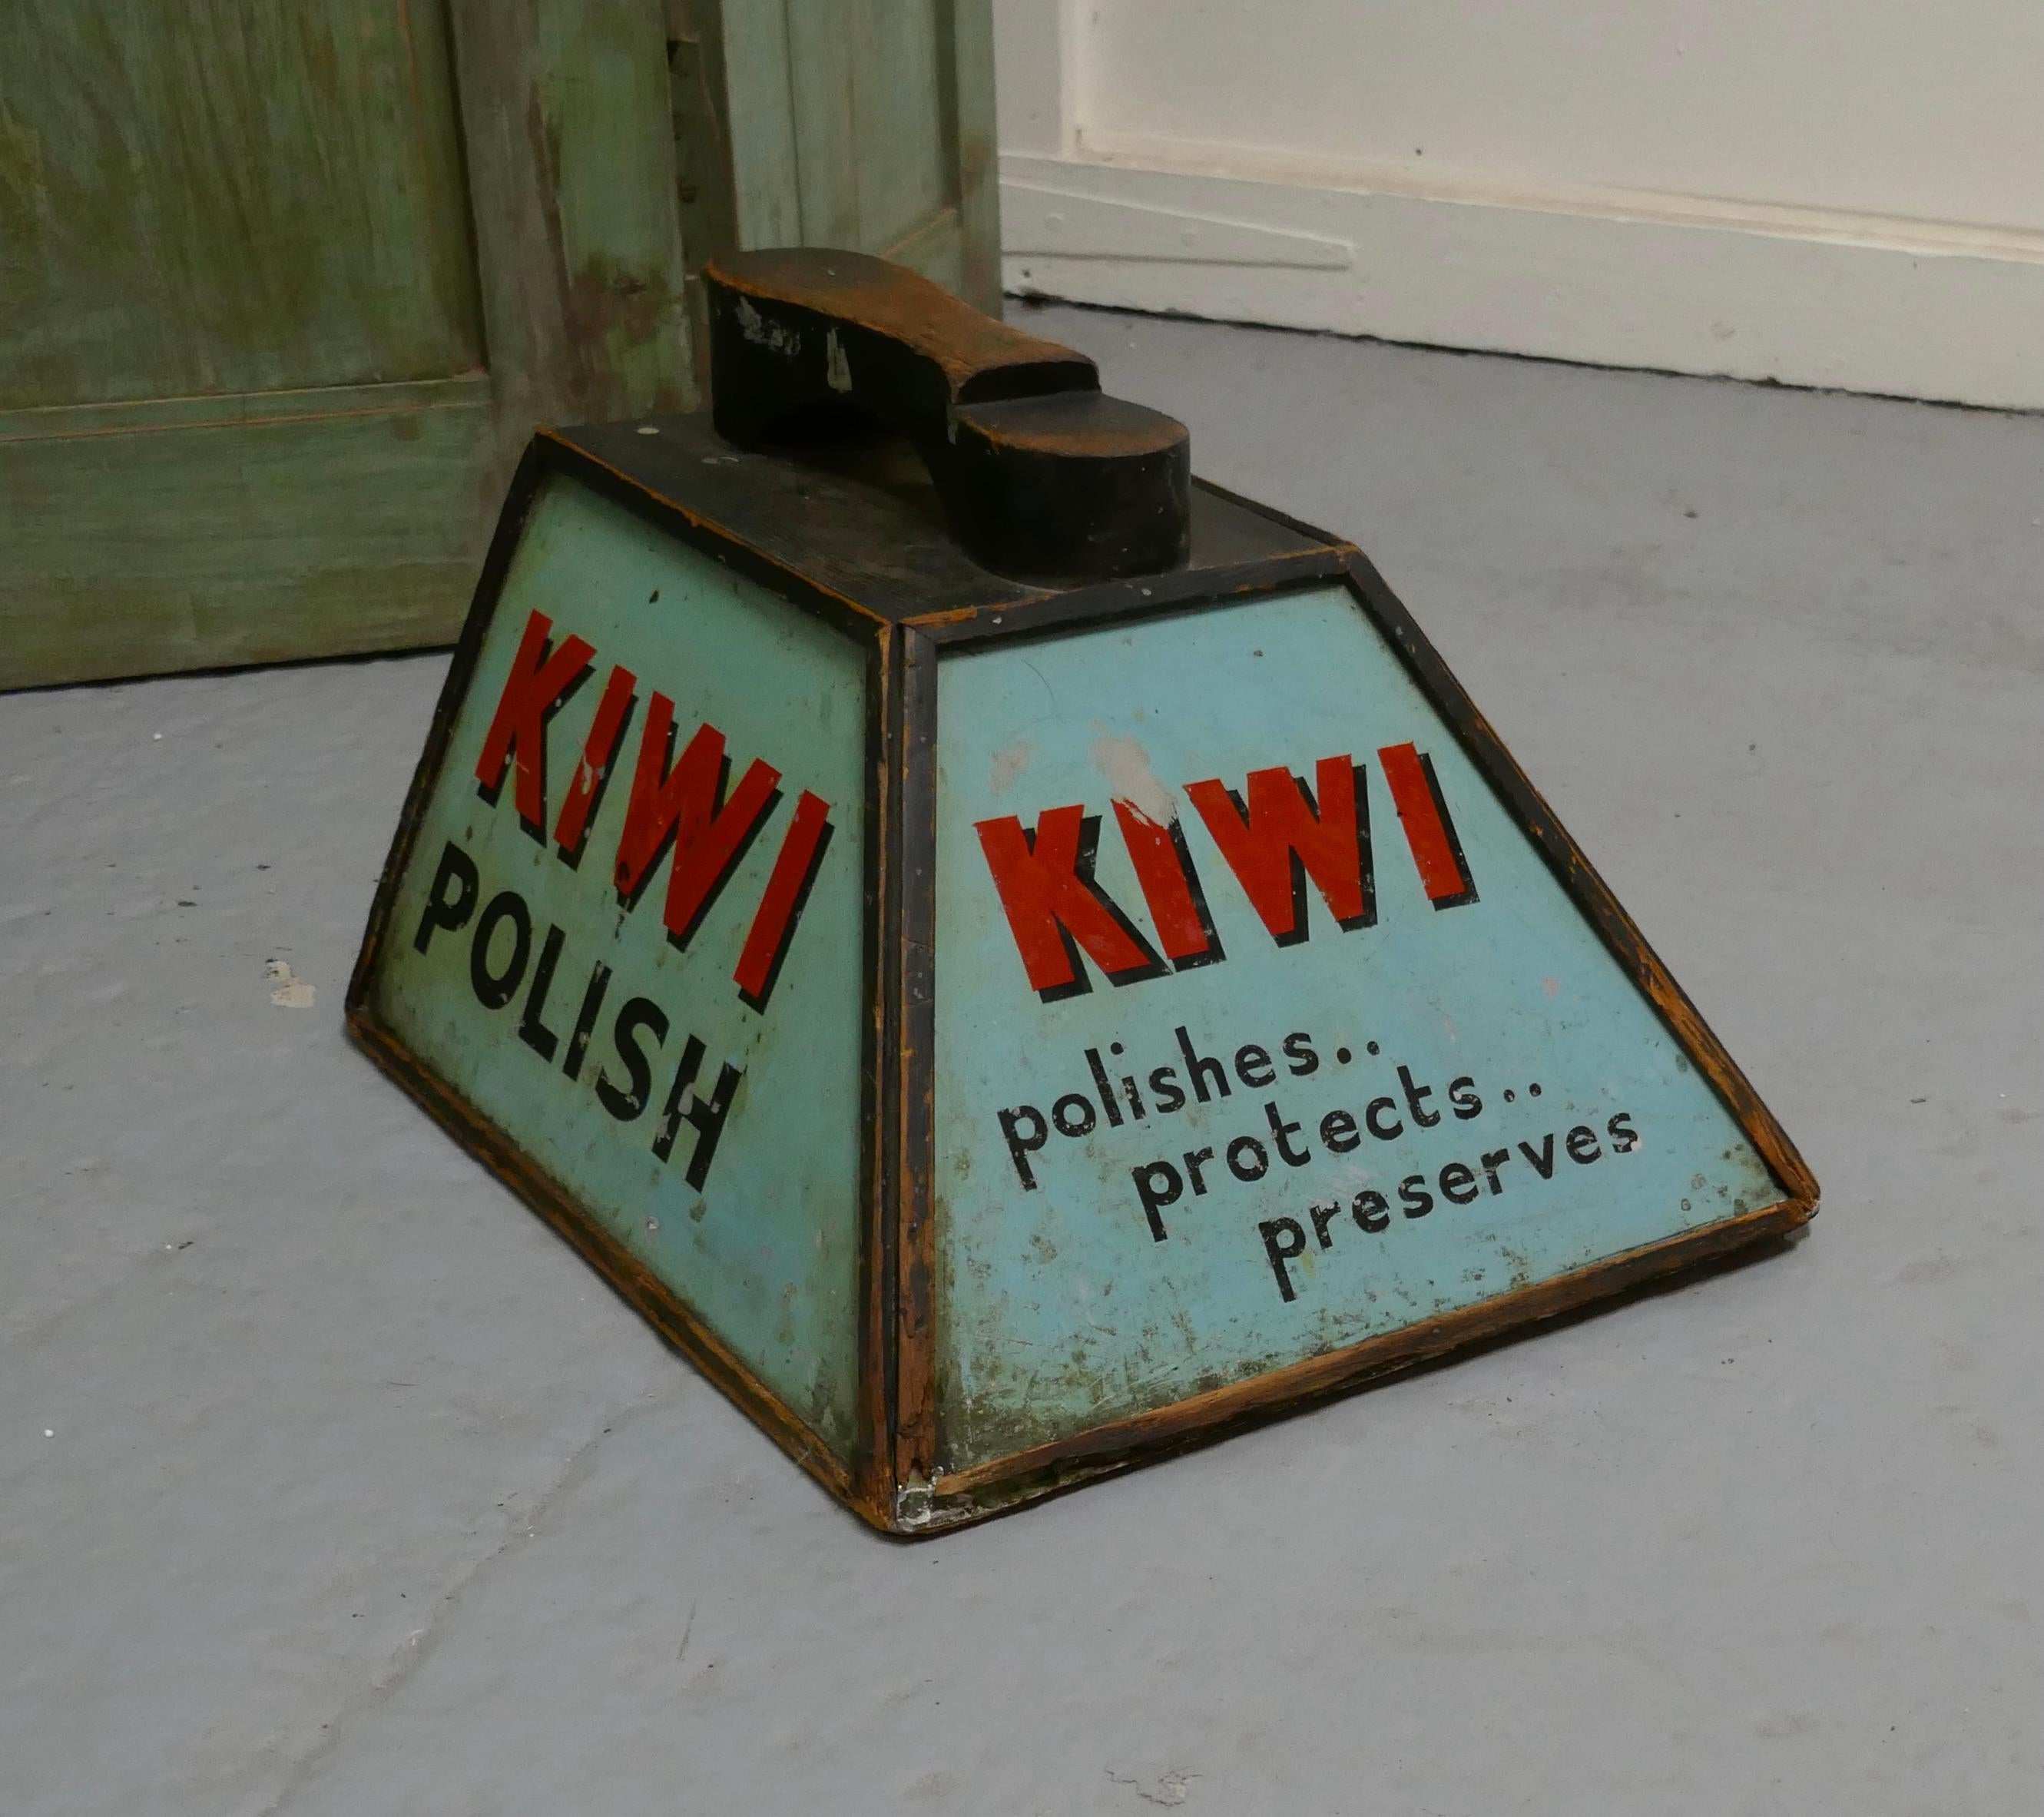 Kiwi Boot Polish Advertising Shoe Shine Box with Shoe Rest

A handy and attractive little piece, the handle of the polish box doubles up as a rest to put the foot on to polish the shoes, 3 of the sides have enamelled advertising signs for KIWI